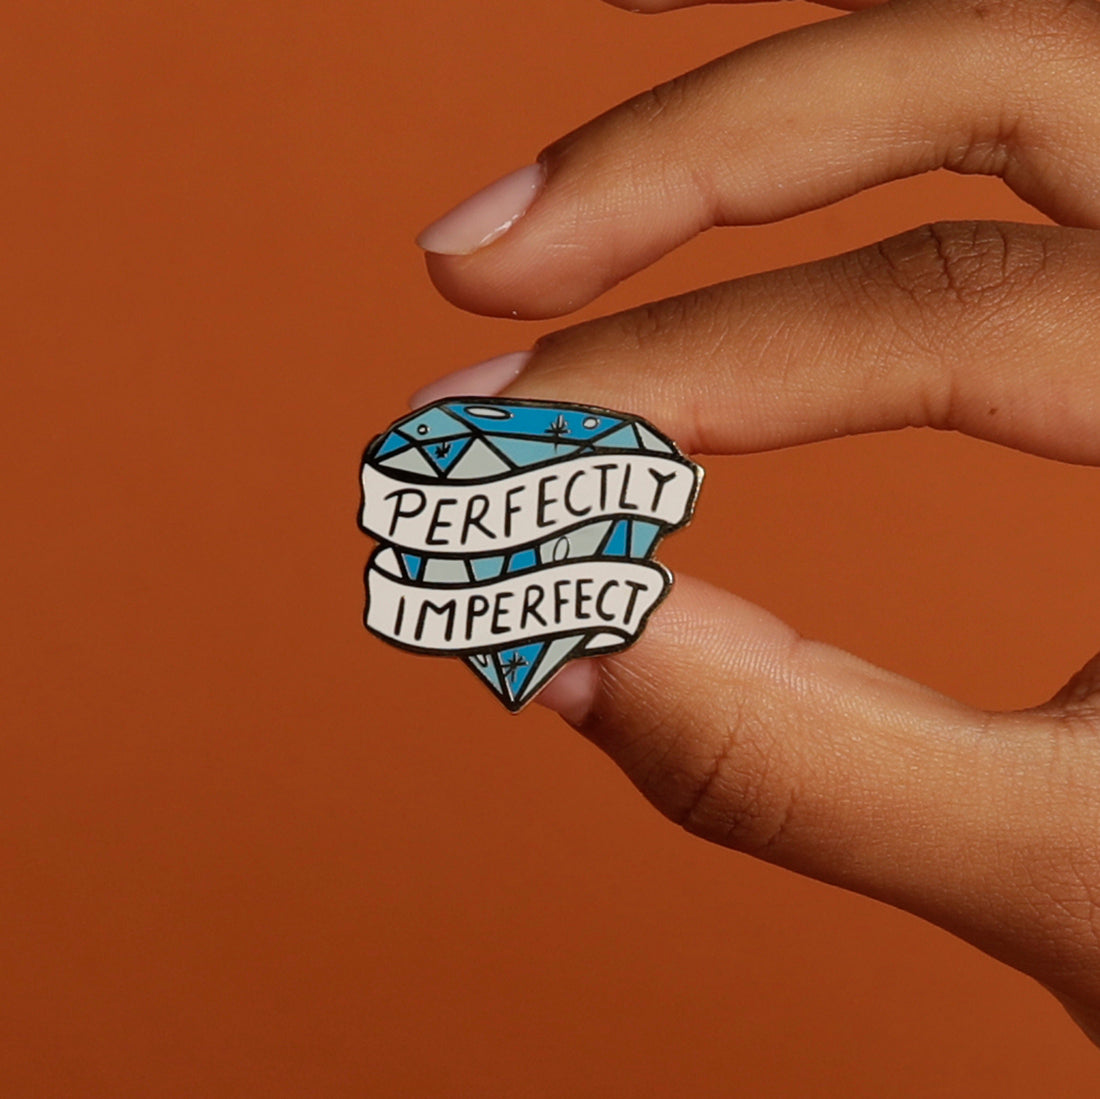 Perfectly Imperfect enamel pin